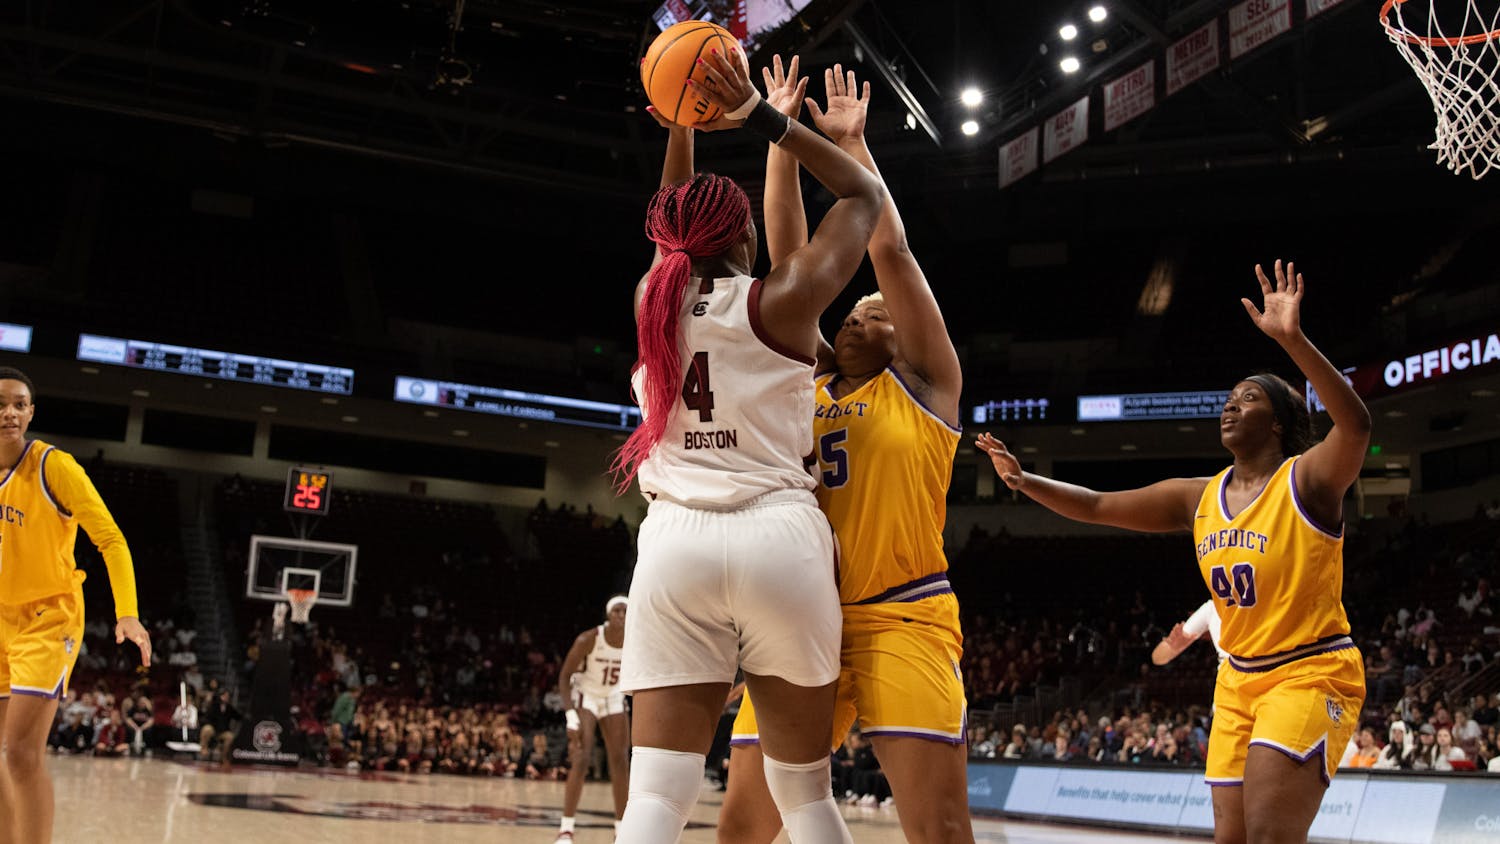 Senior forward Aliyah Boston holds the ball above her head and away from a Benedict College player during the exhibition game at Colonial Life Arena on Oct. 31, 2022. Boston was recently unanimously named to the AP Preseason All-American team.&nbsp;